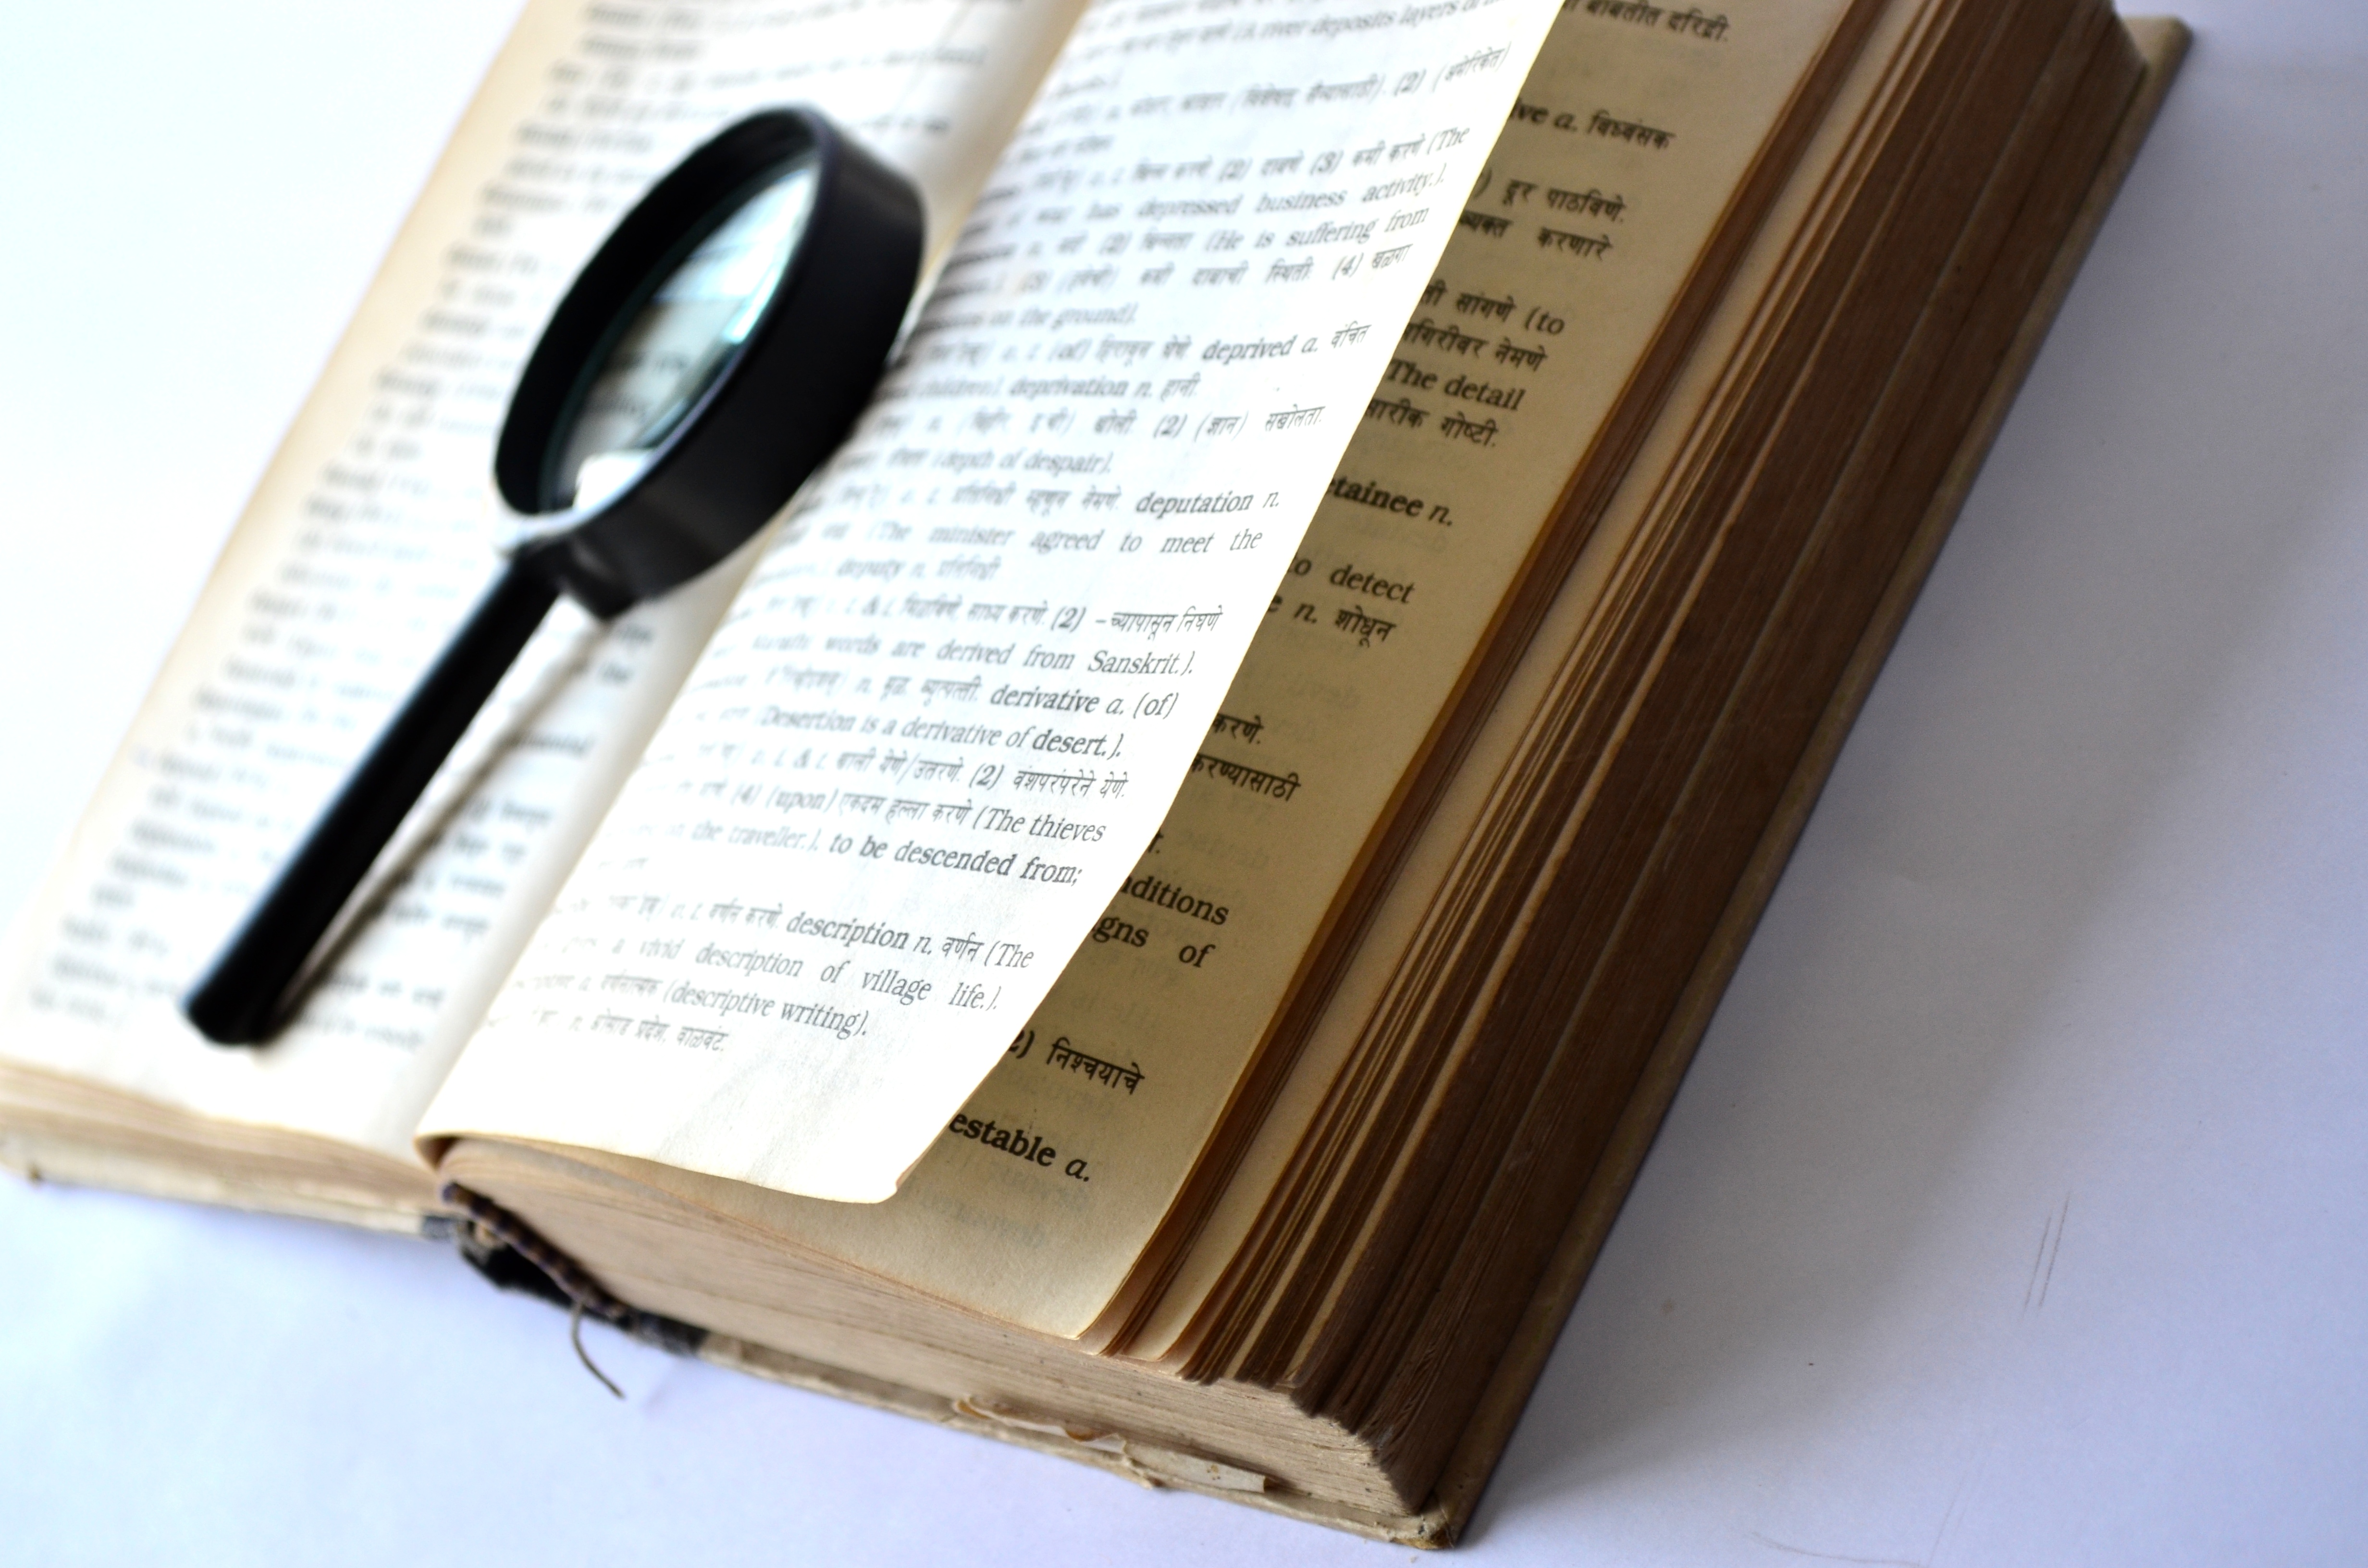 A magnifying glass sits atop an open book